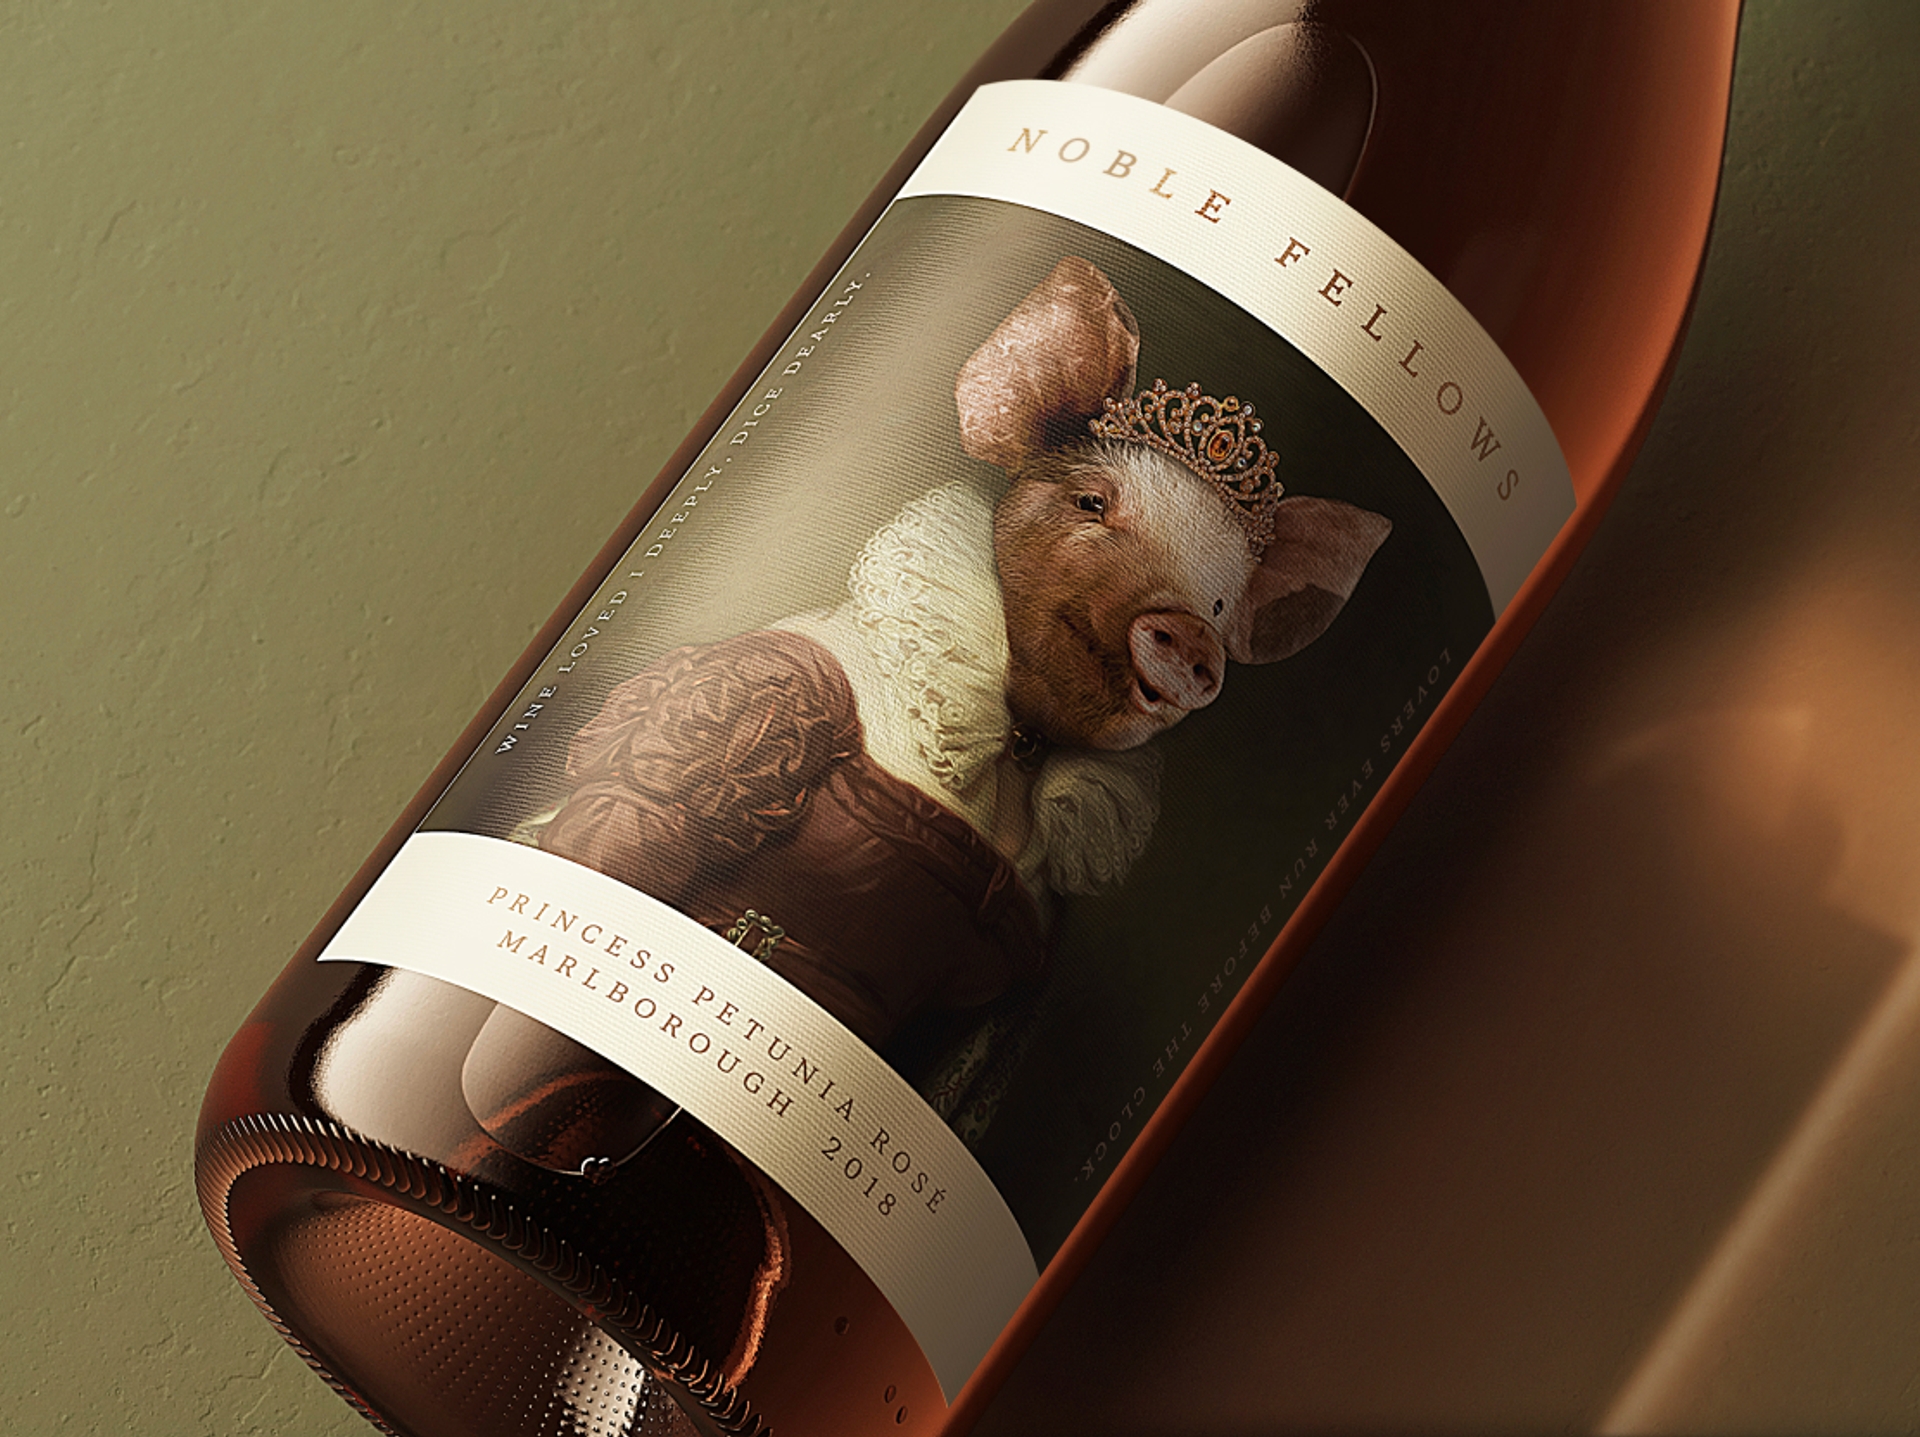 Close-up of Noble Fellows “Princess Petunia Rosé Marlborough 2018” wine label design by packaging design agency Our Revolution featuring a wine label with a painted portrait of a pig with a tiara in a royal dress